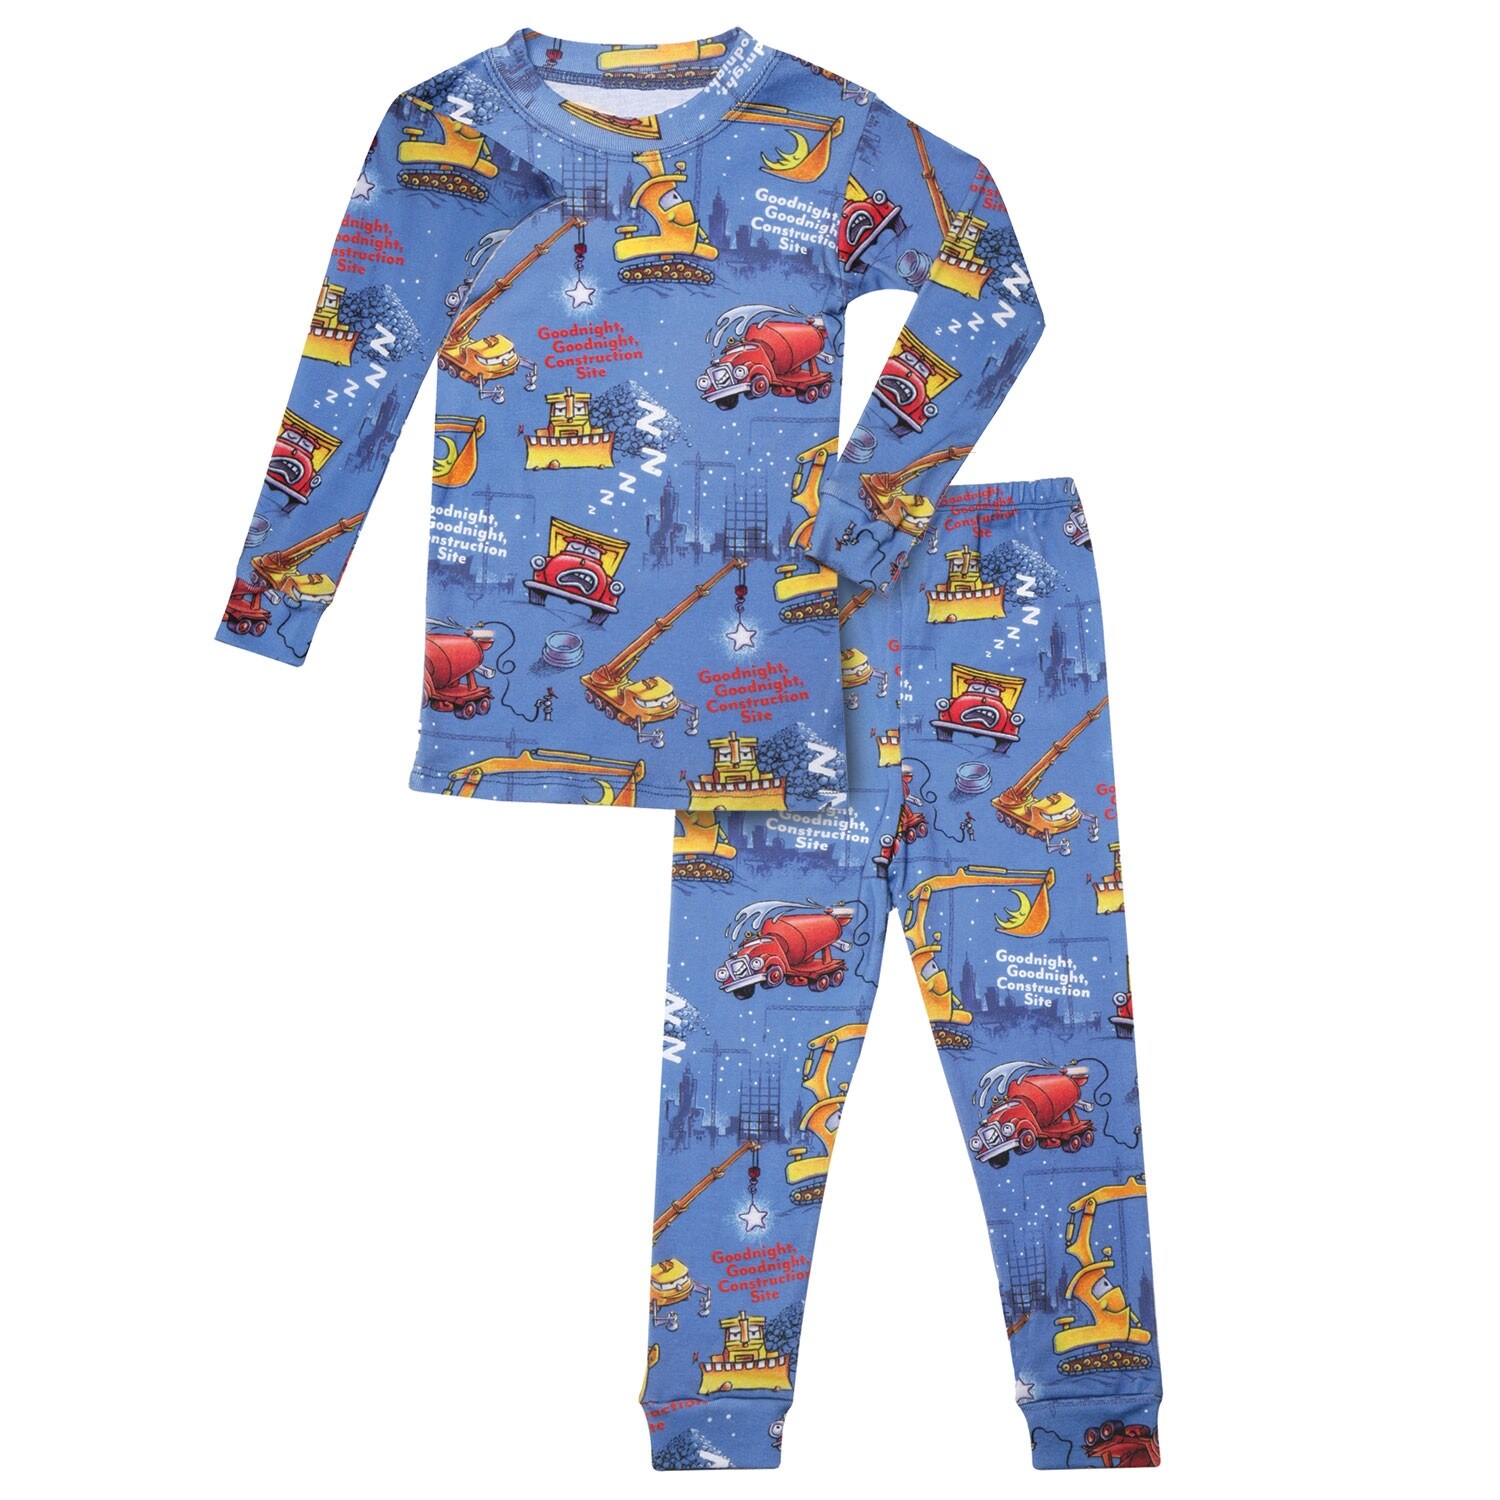 Gerber Unisex Baby and Toddler 4 Piece Holiday Cotton Pajama Set